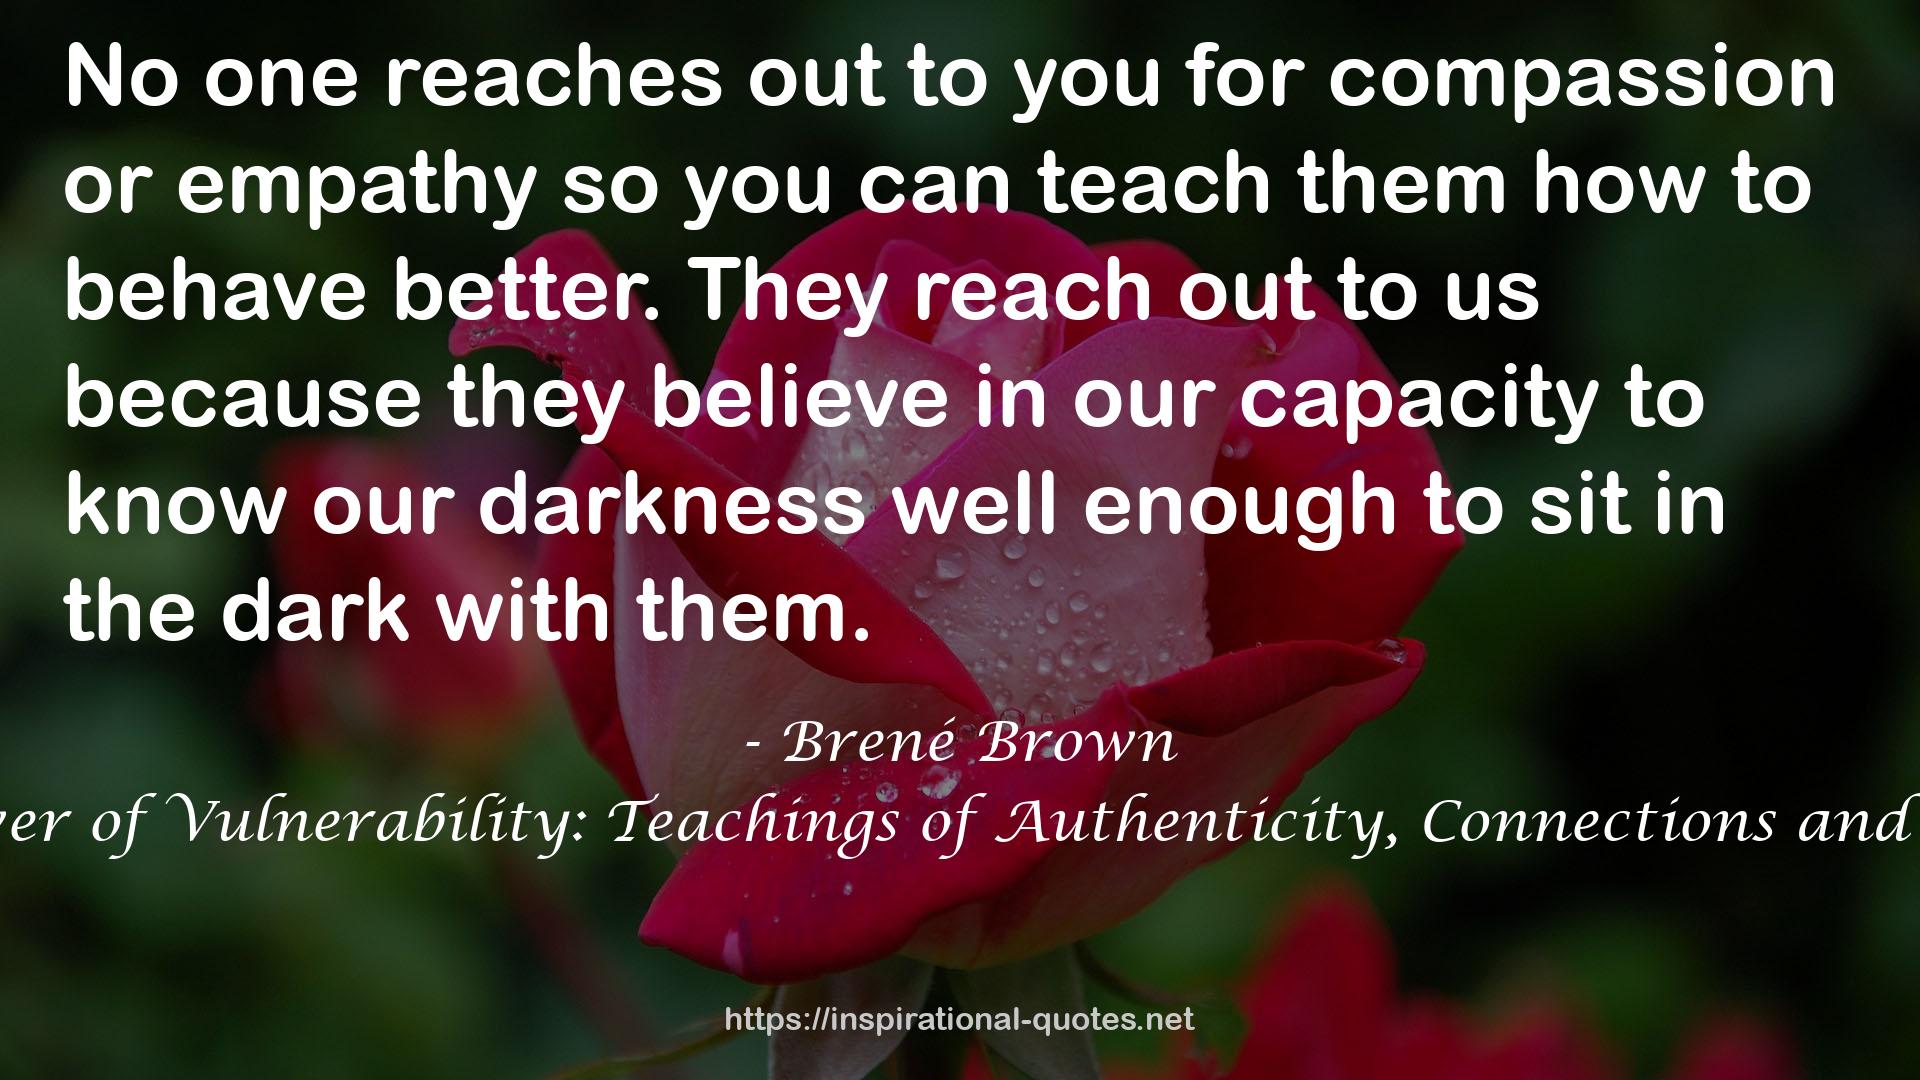 The Power of Vulnerability: Teachings of Authenticity, Connections and Courage QUOTES